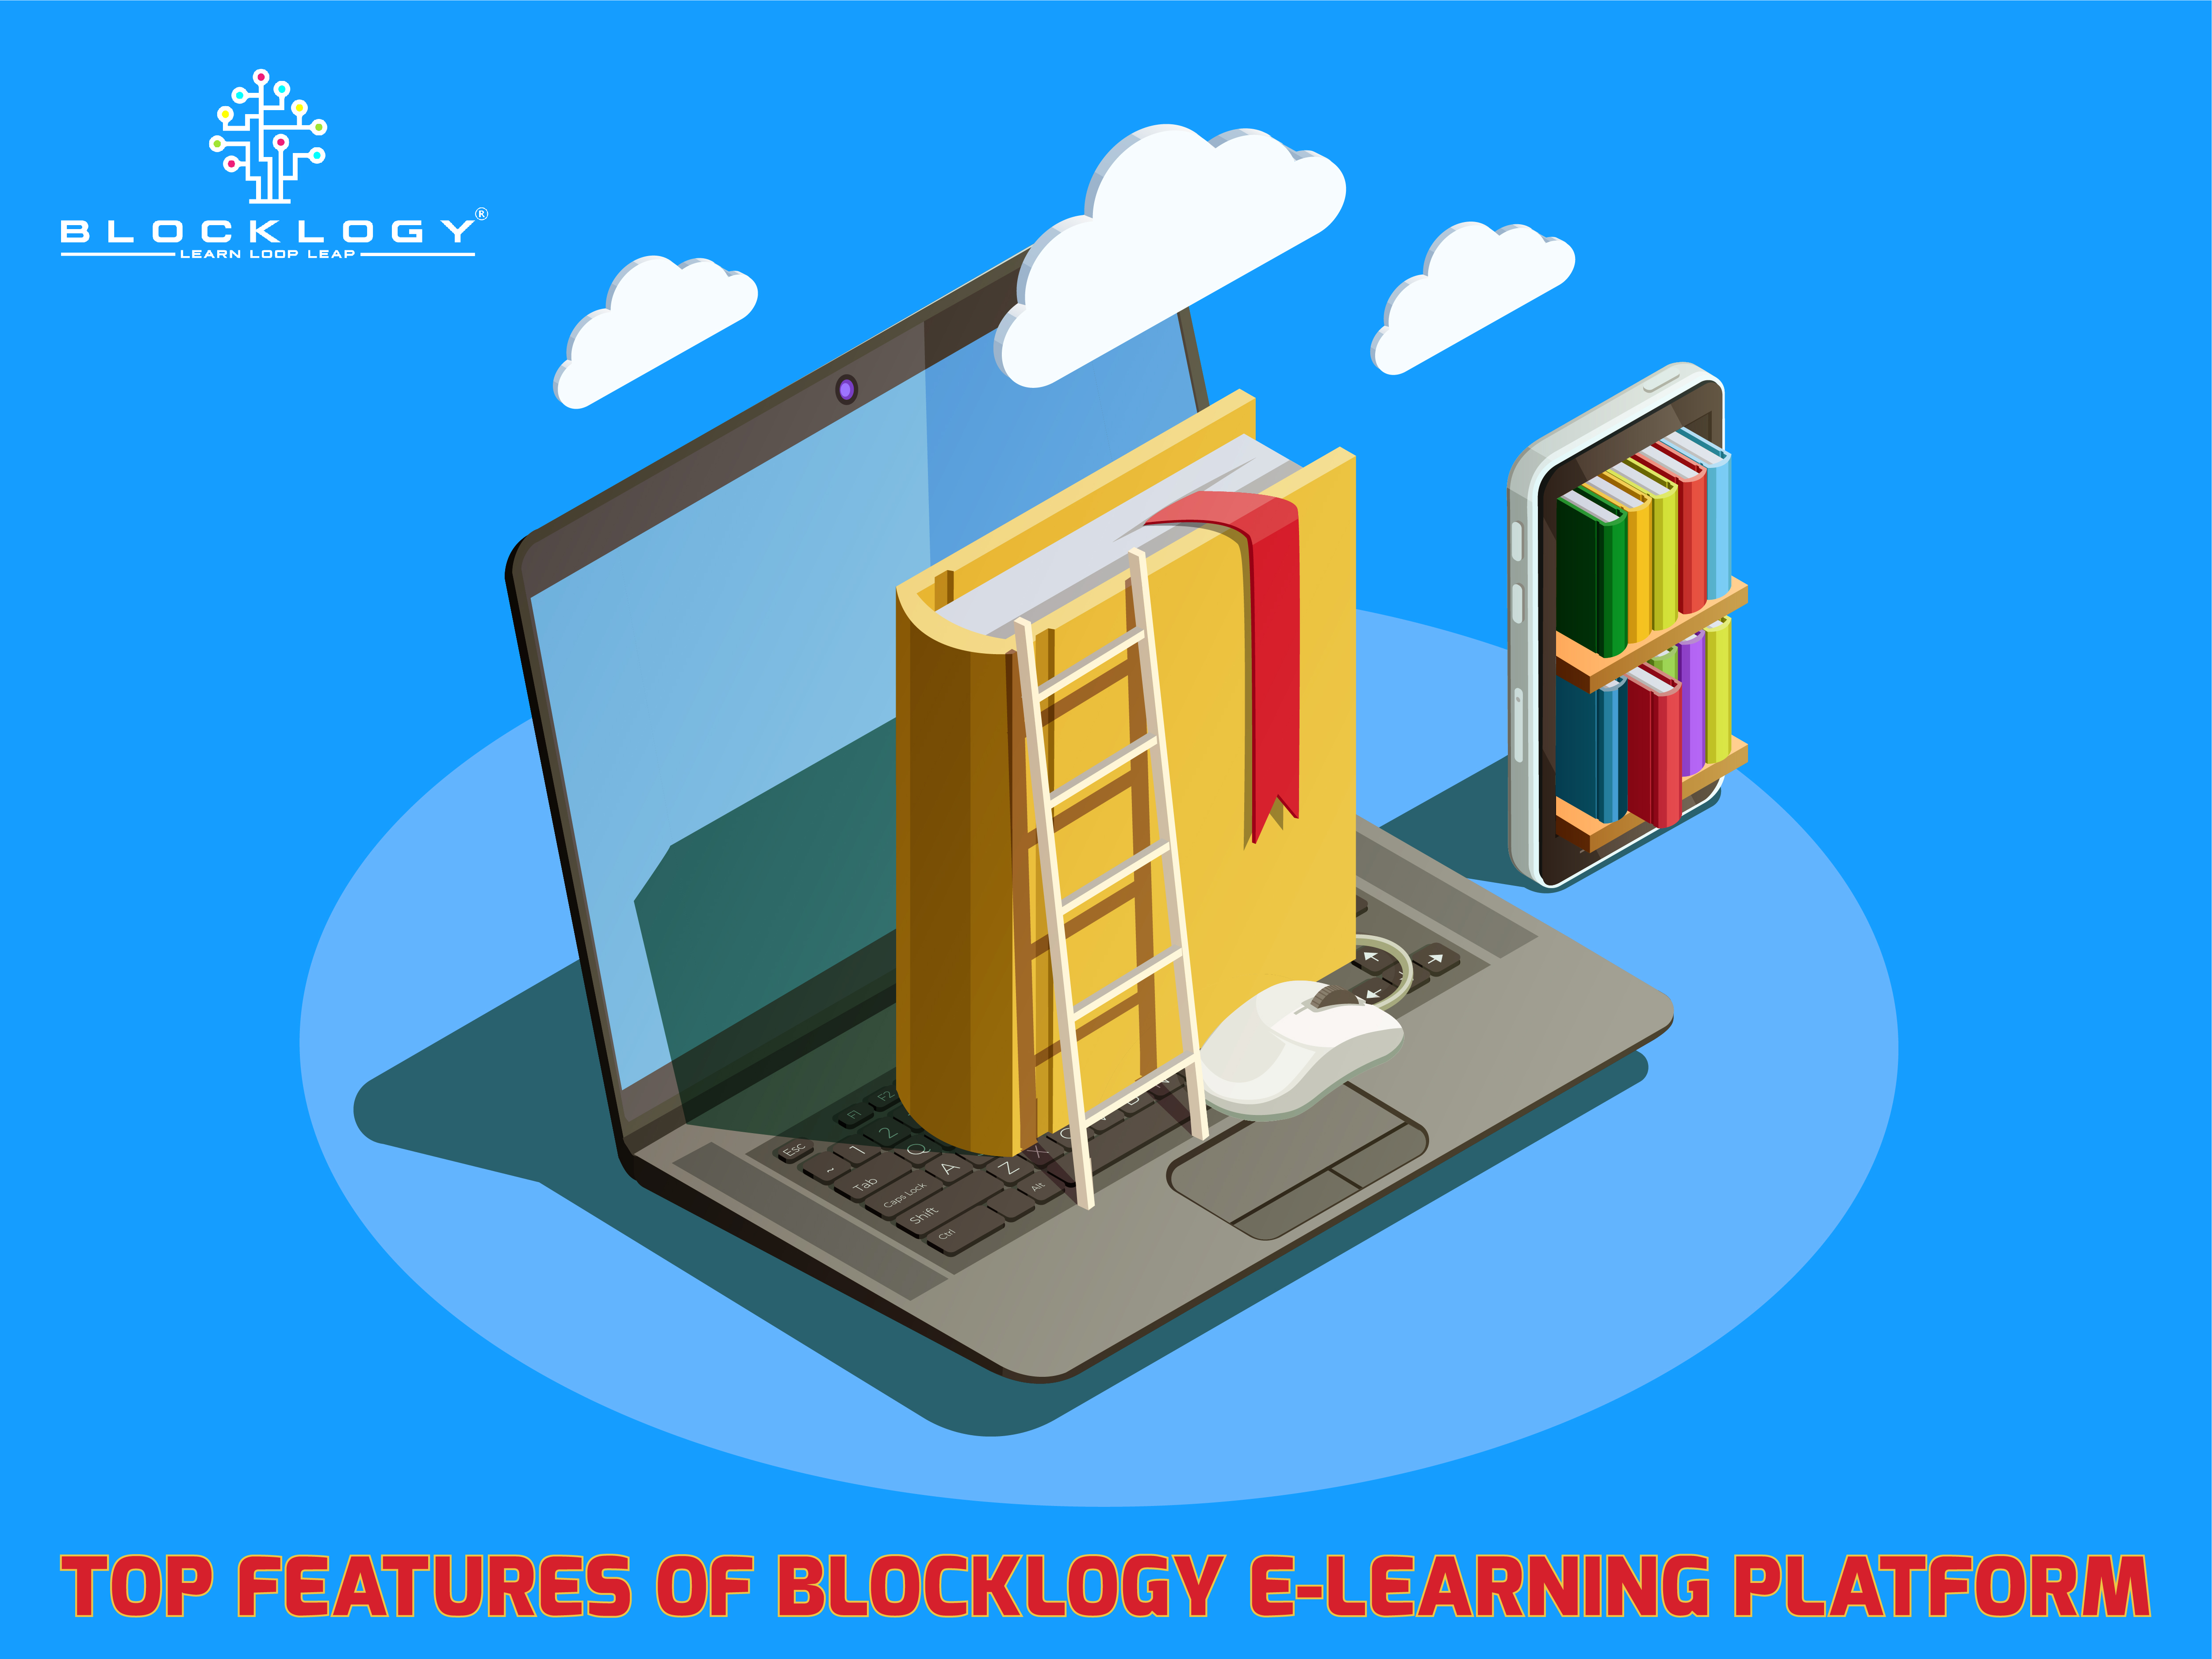 Blocklogy | TOP FEATURES OF BLOCKLOGY E-LEARNING PLATFORM